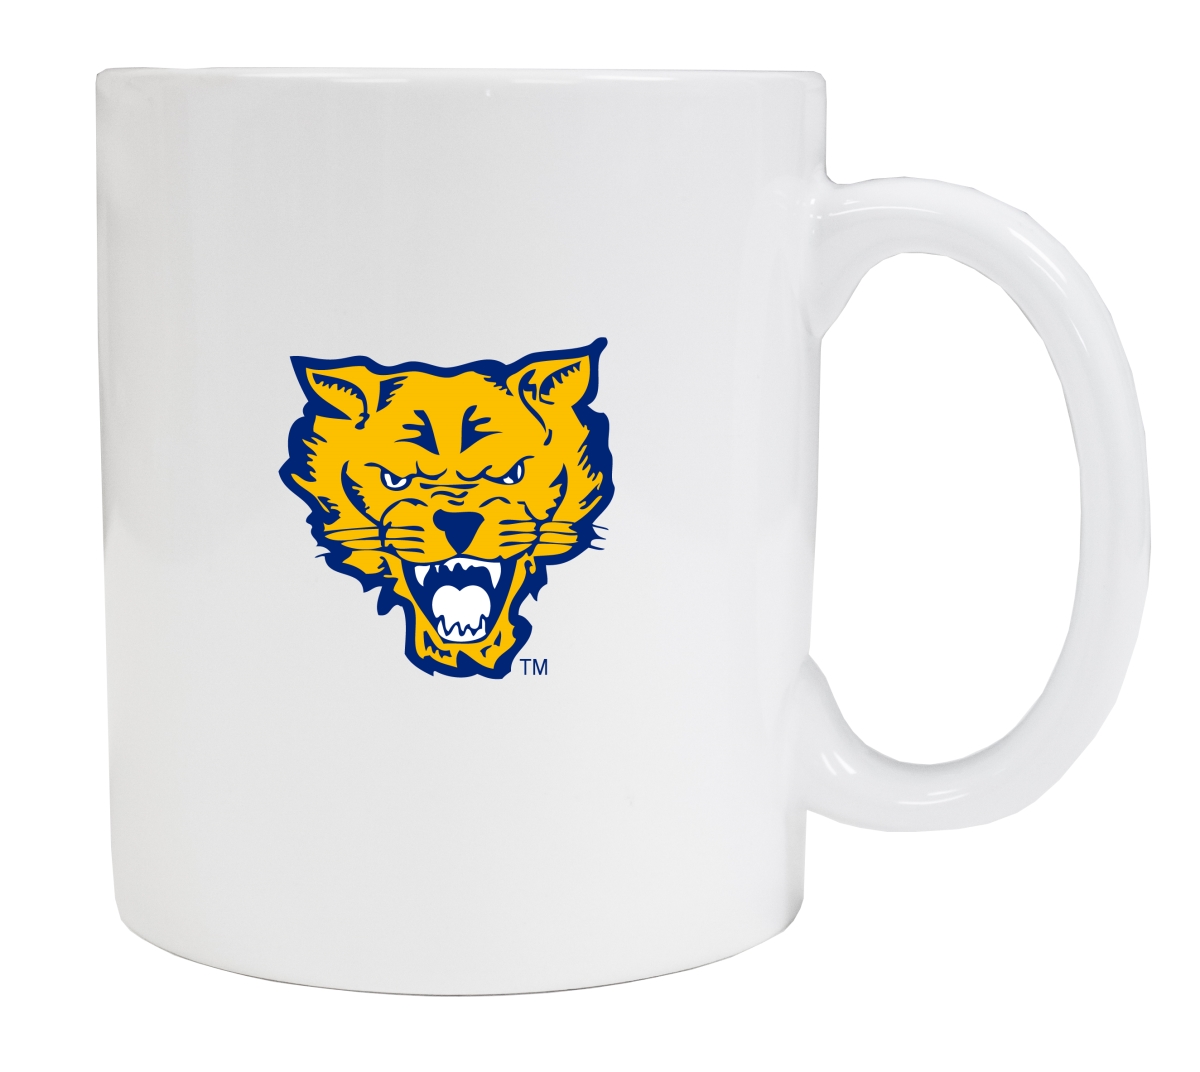 Picture of R & R Imports MUG2-C-FRTV19 W Fort Valley State University White Ceramic Coffee Mug - Pack of 2